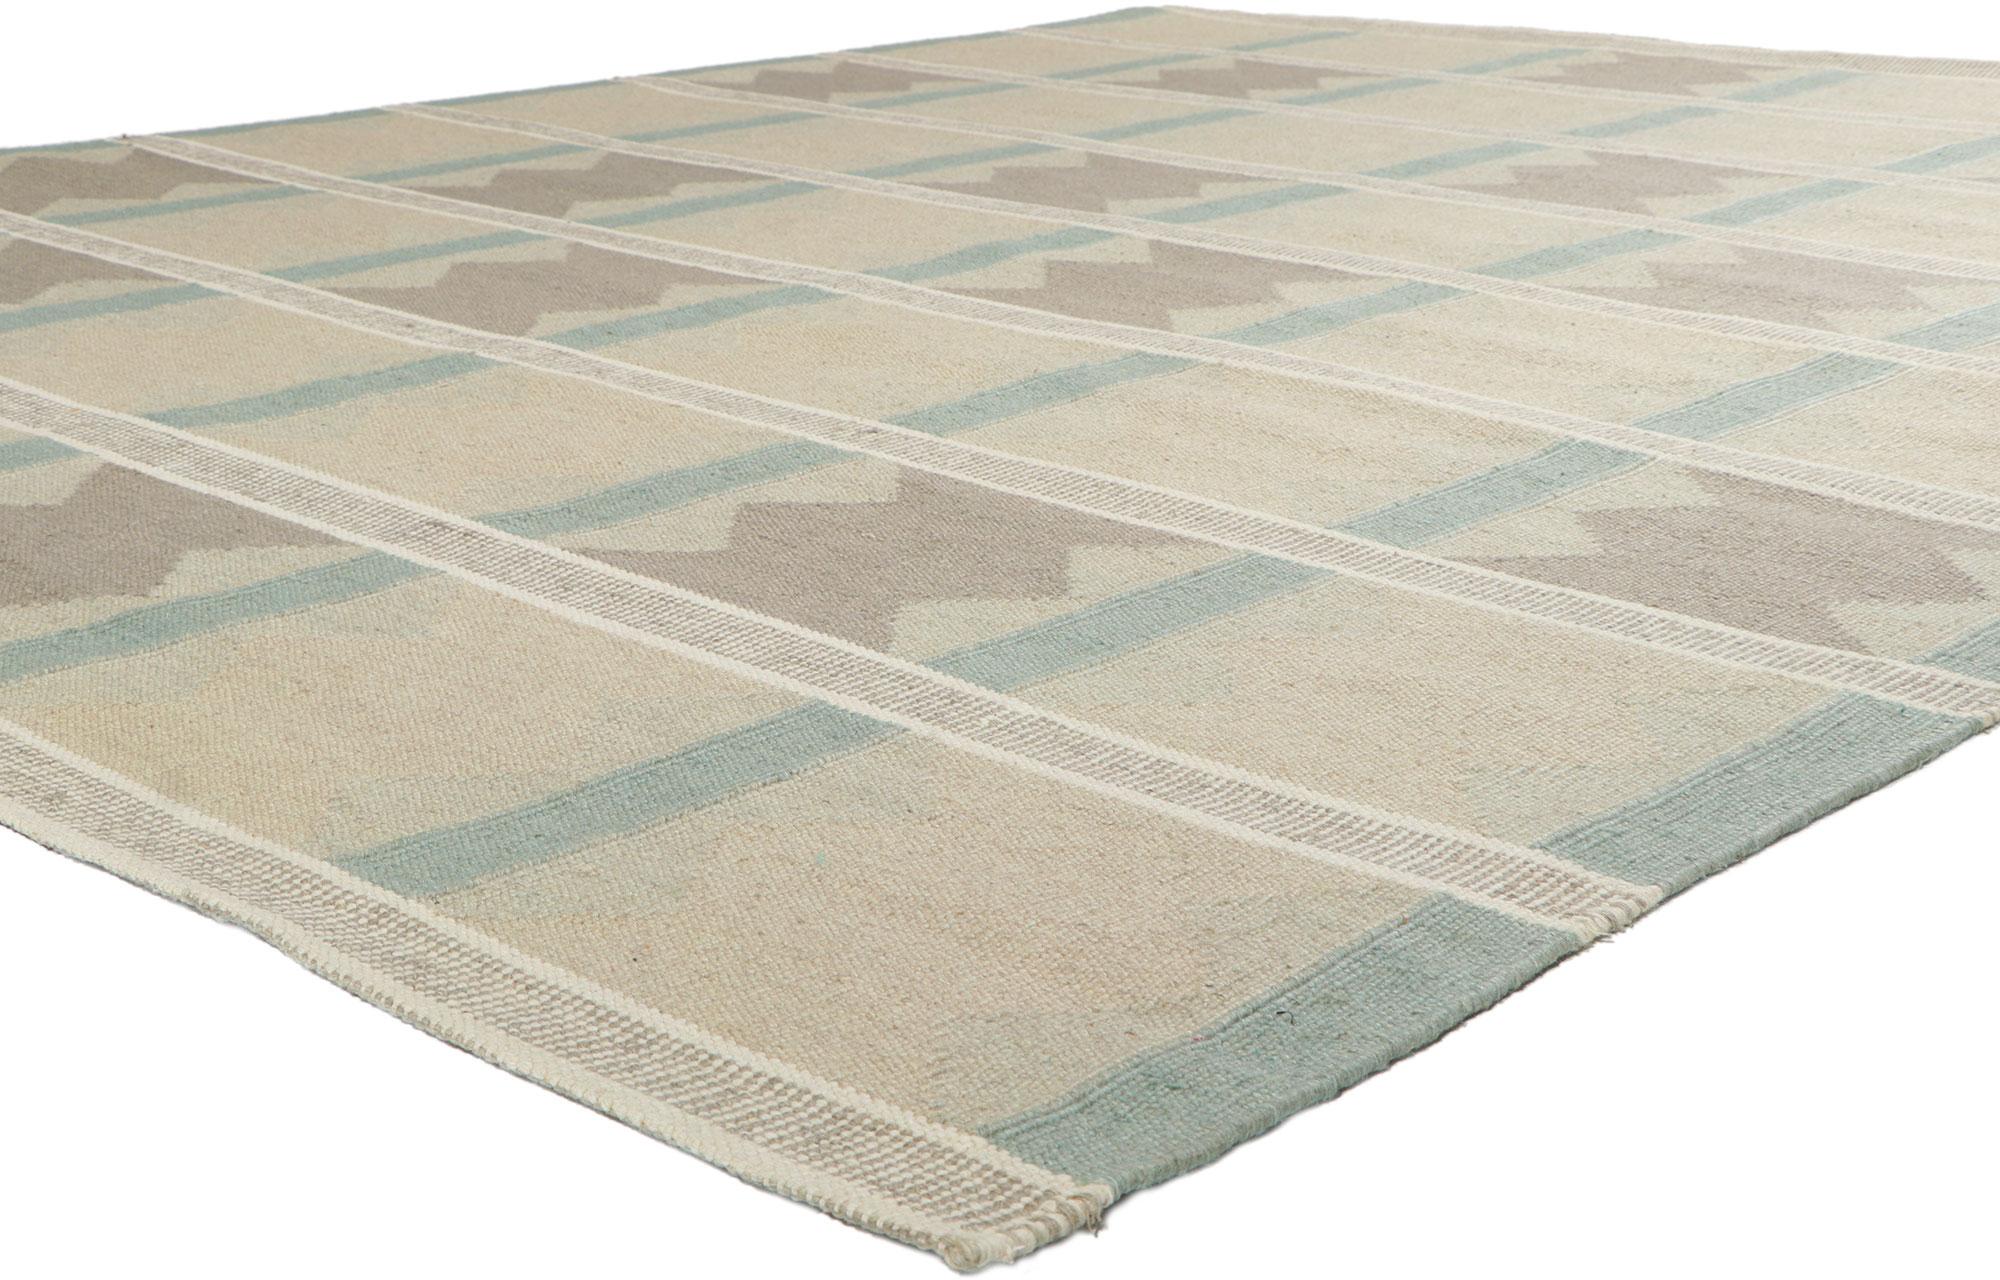 30846 New Swedish Ingegerd Silow Inspired Kilim Rug with Scandinavian Modern Style 09'03 x 11'05.
With its simplicity, geometric design and soft colors, this hand-woven wool Swedish inspired Kilim rug provides a feeling of cozy contentment without